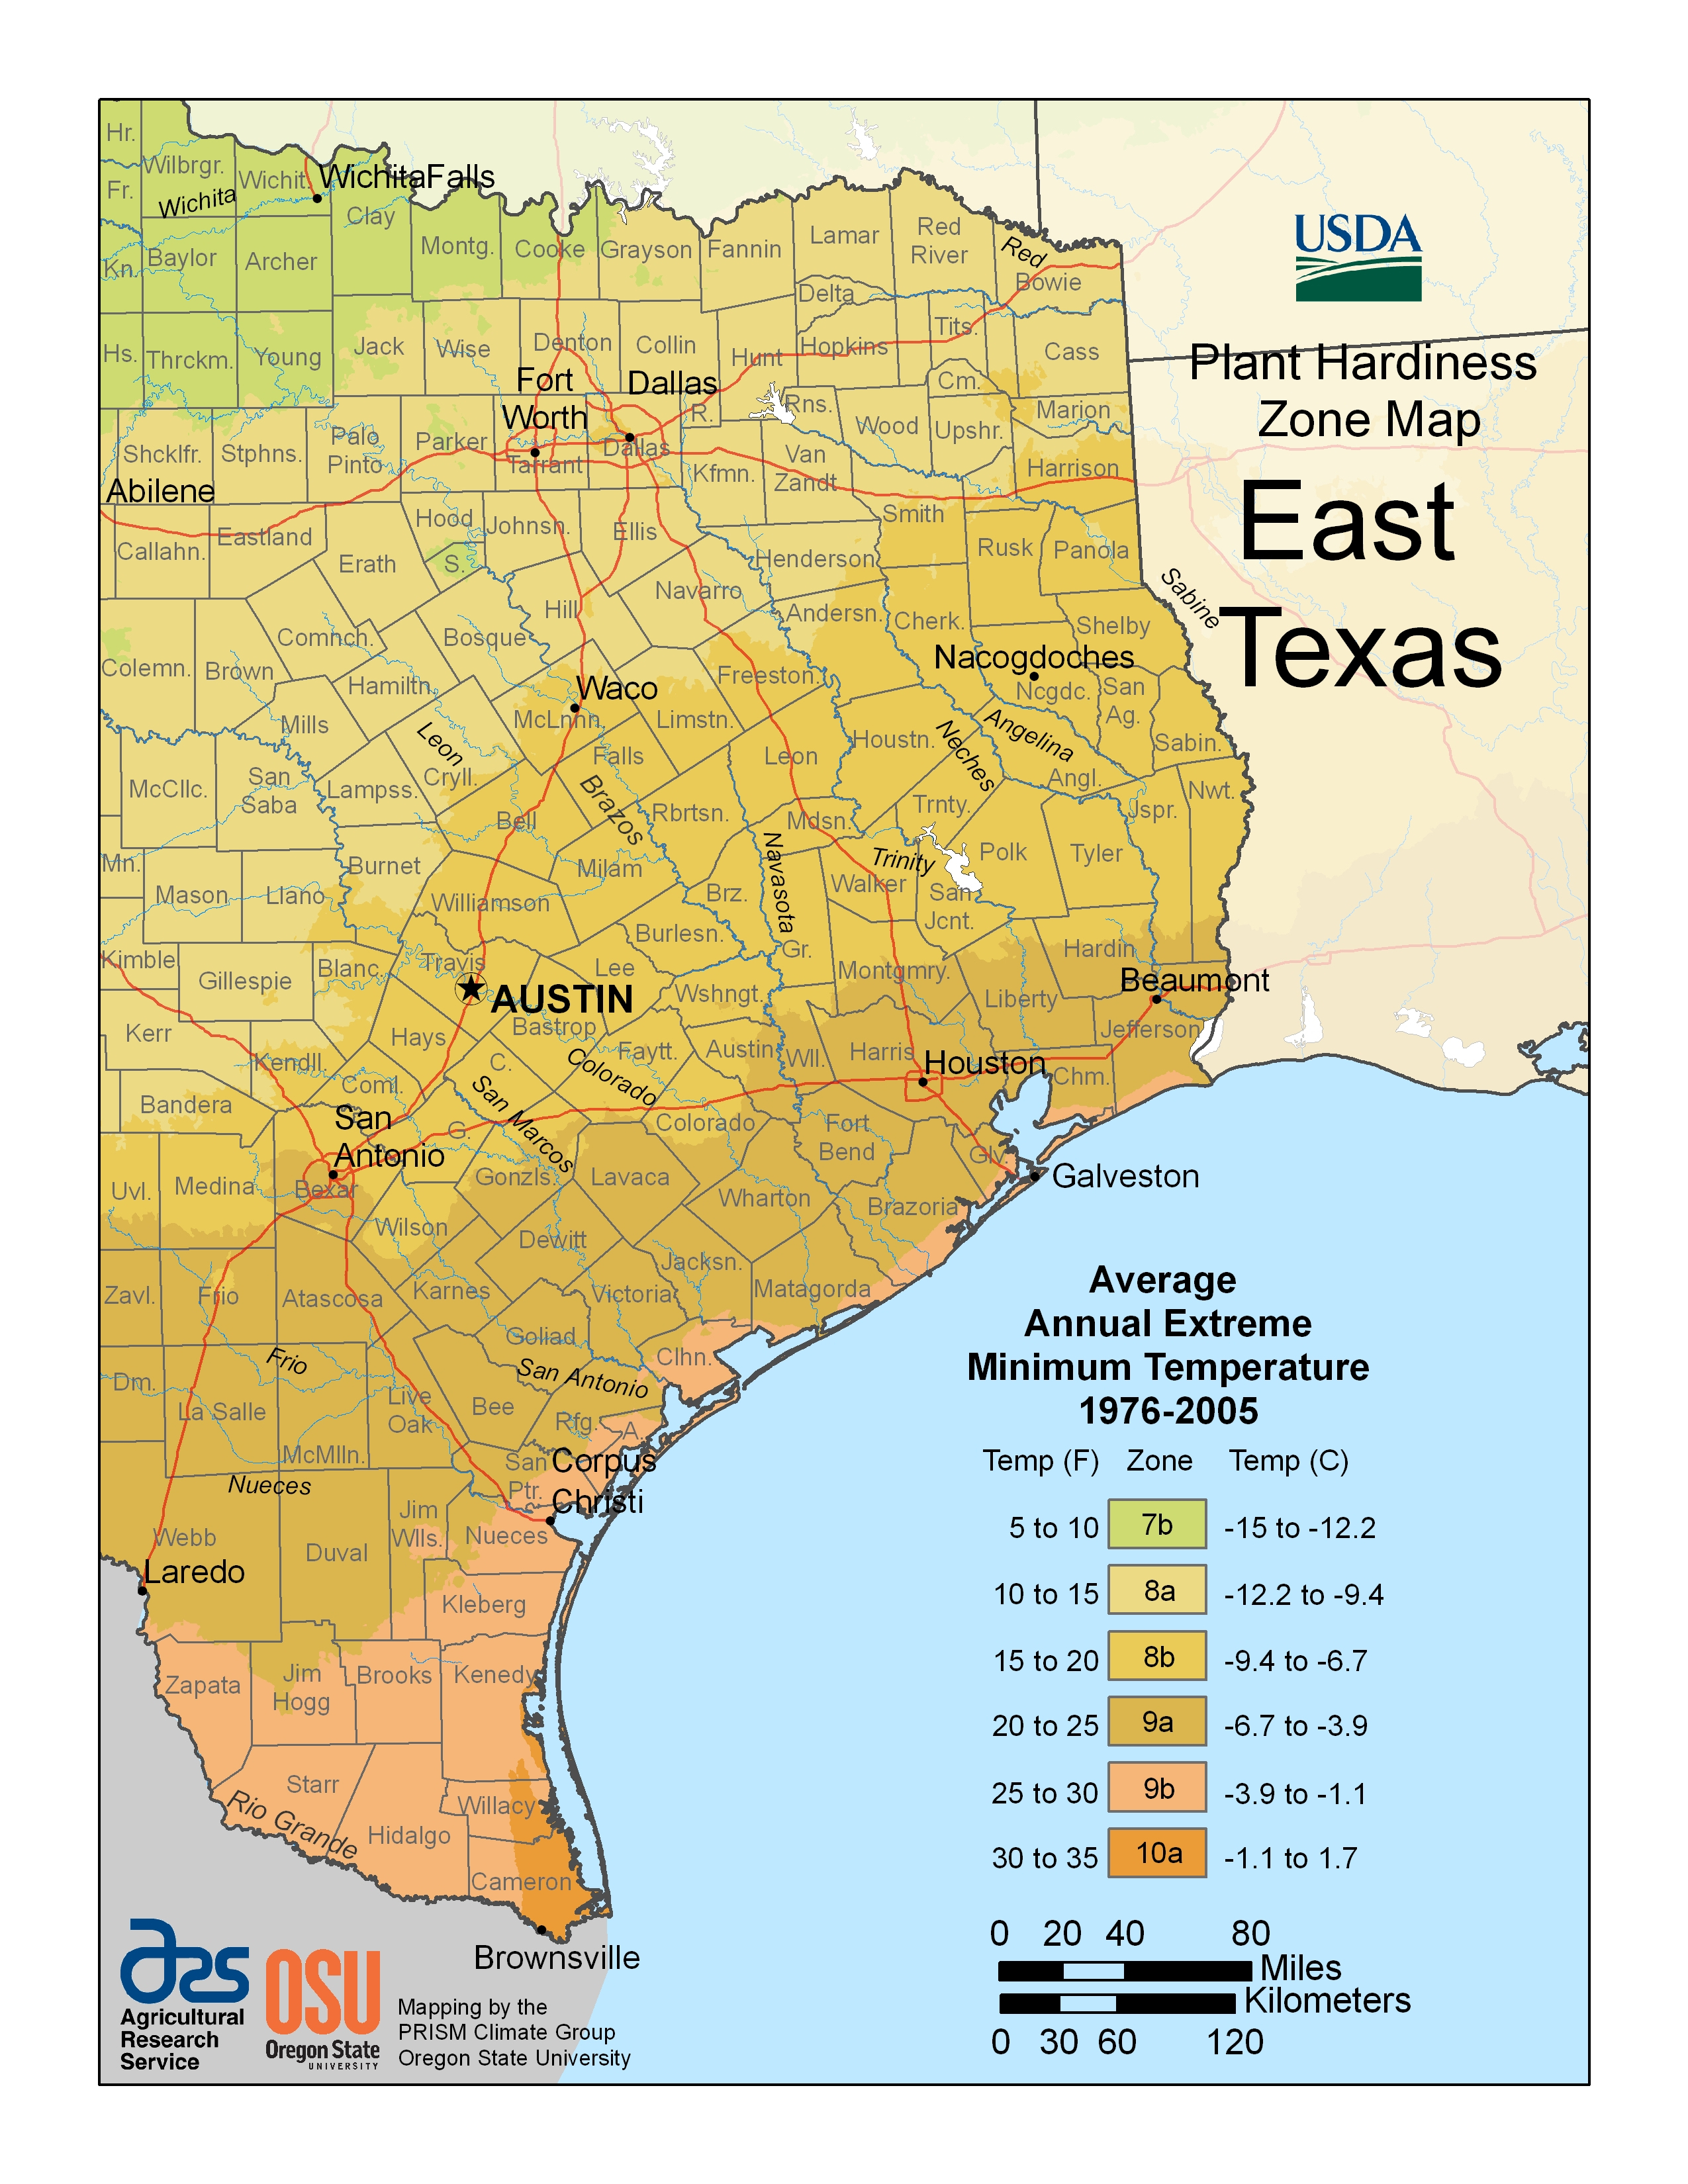 Cold Hardiness Zone Map | - Texas Hardiness Zone Map